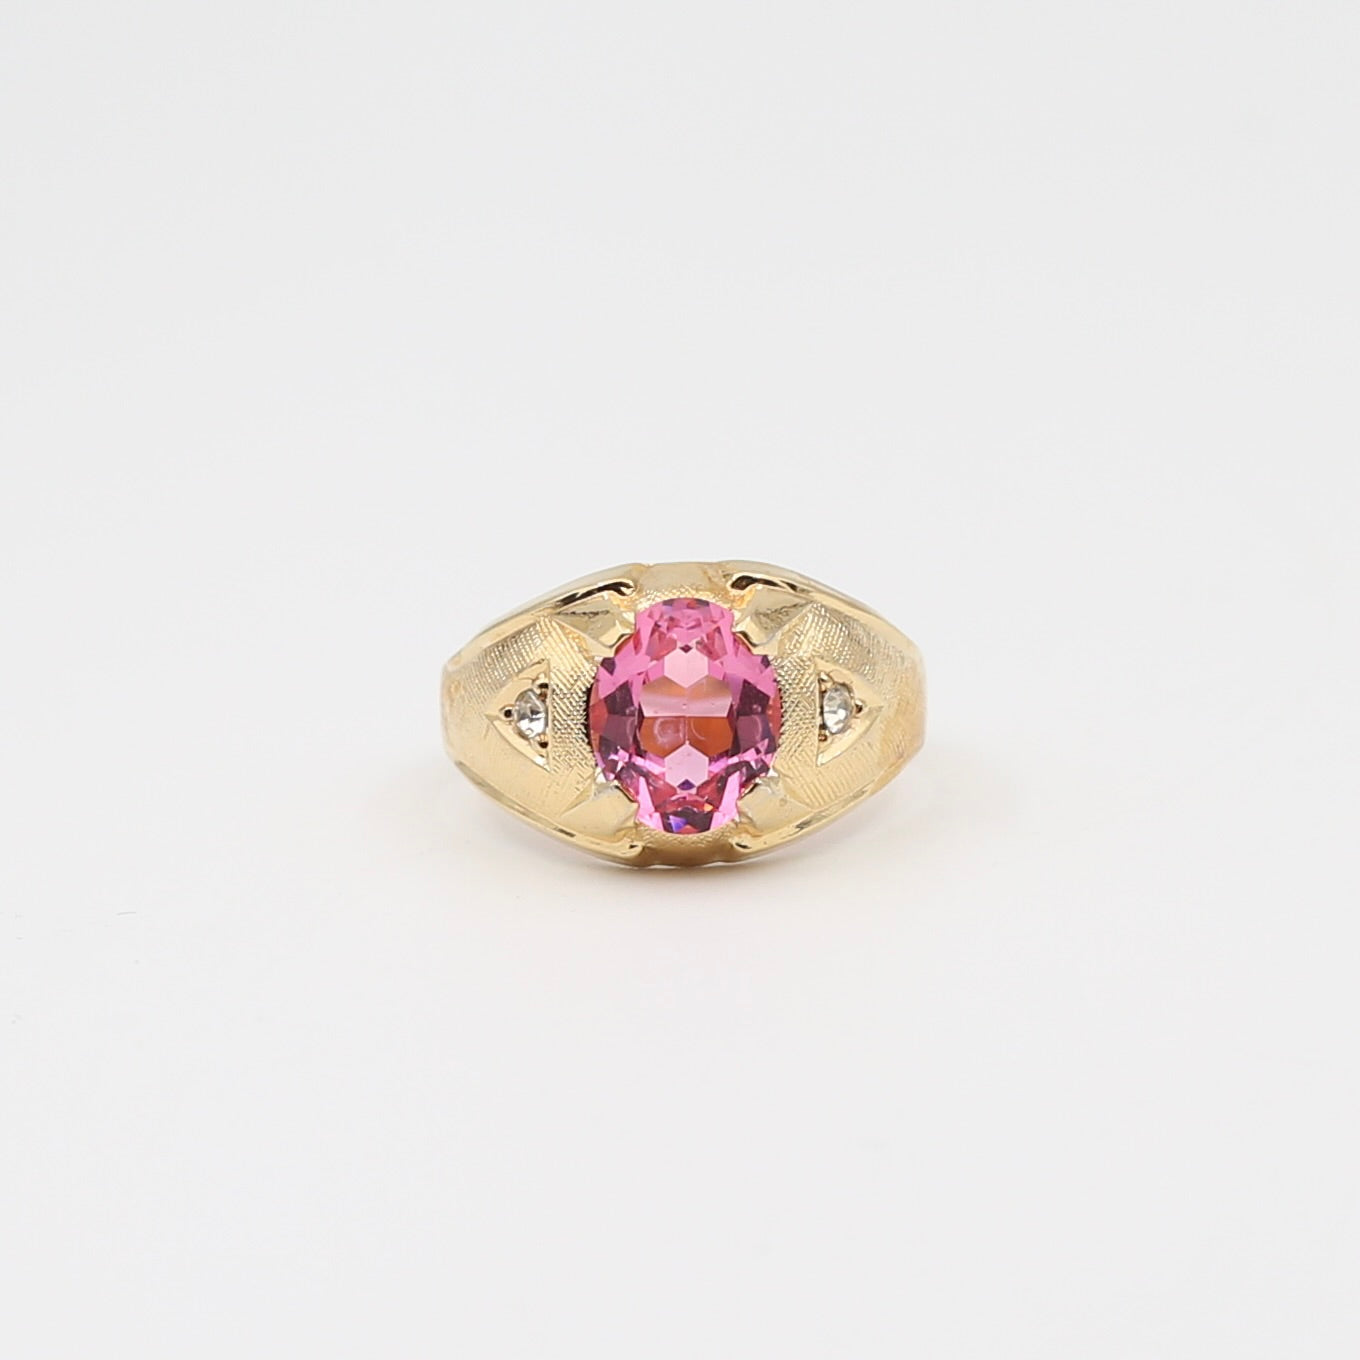 Costume gold toned with pink stone ring